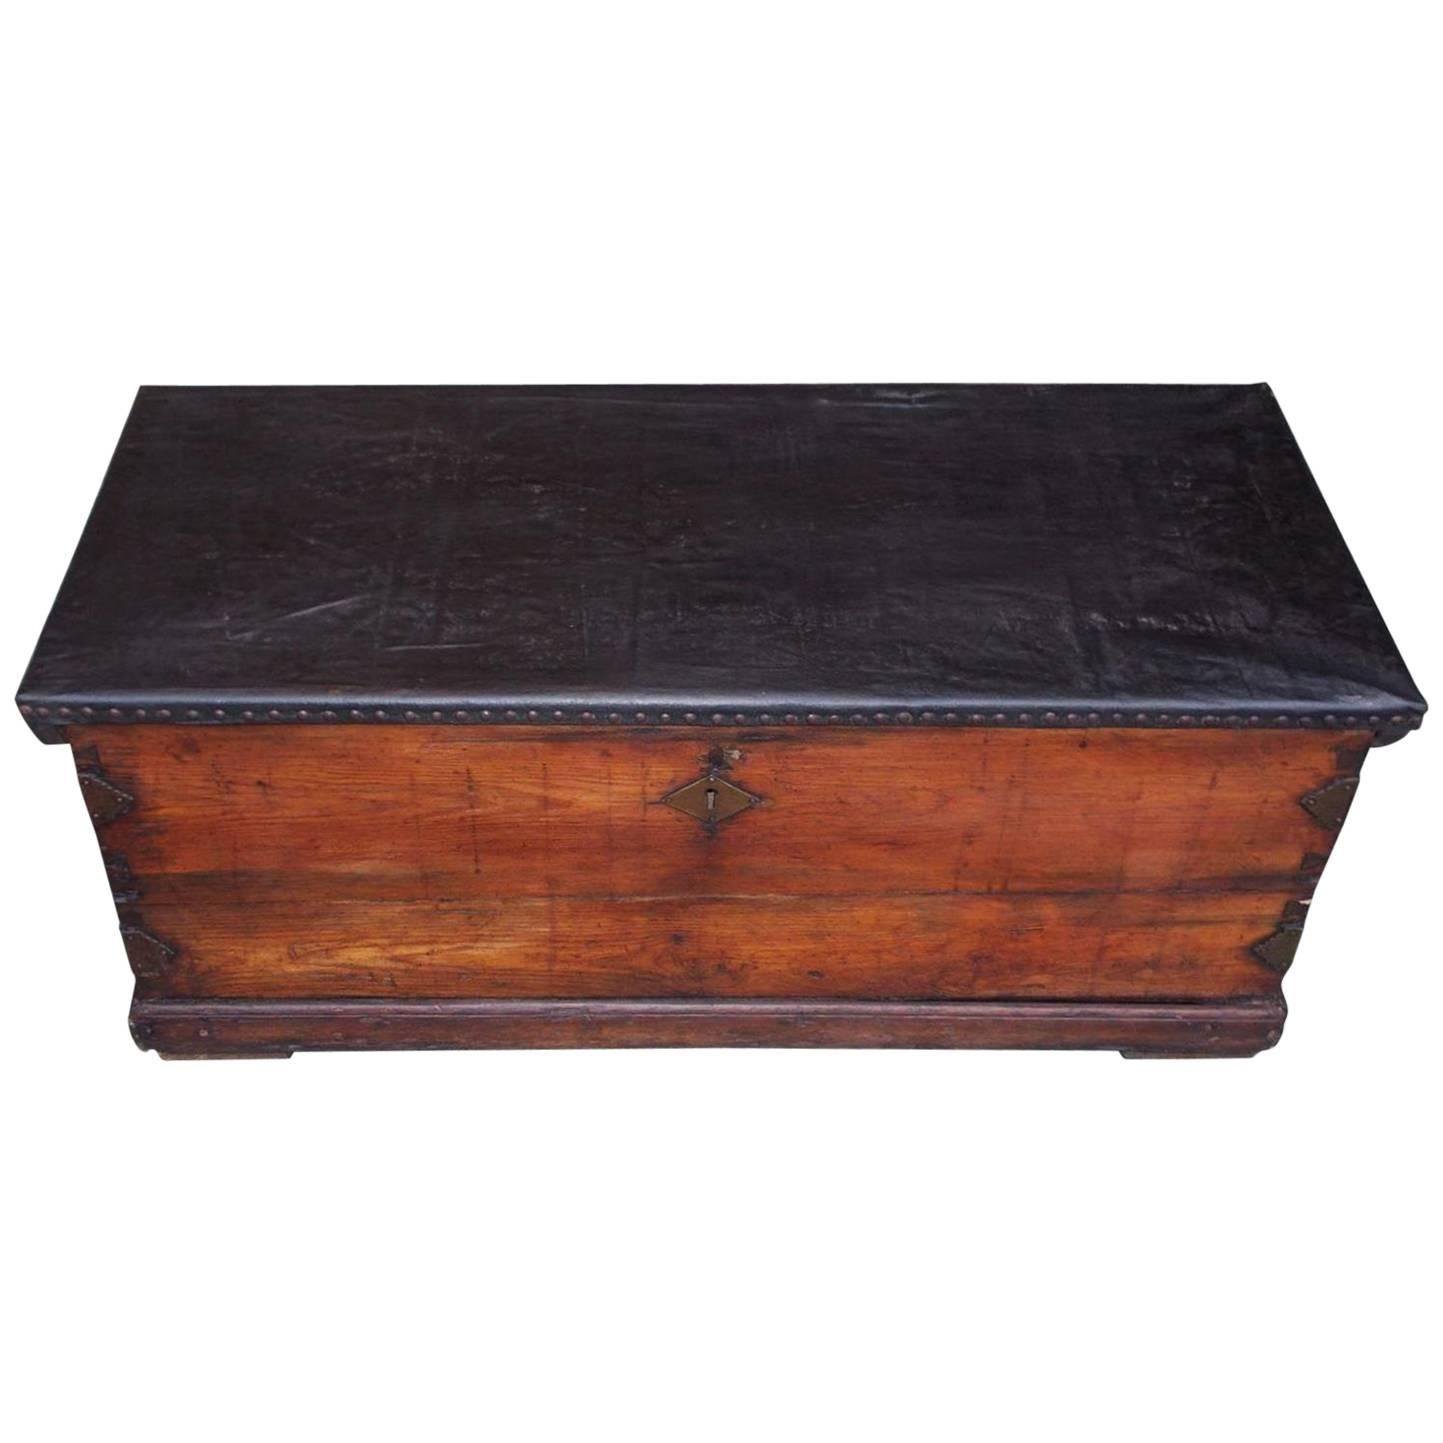 American Pine and Leather Nautical Sea Chest with Braided Rope Beckets, C. 1800